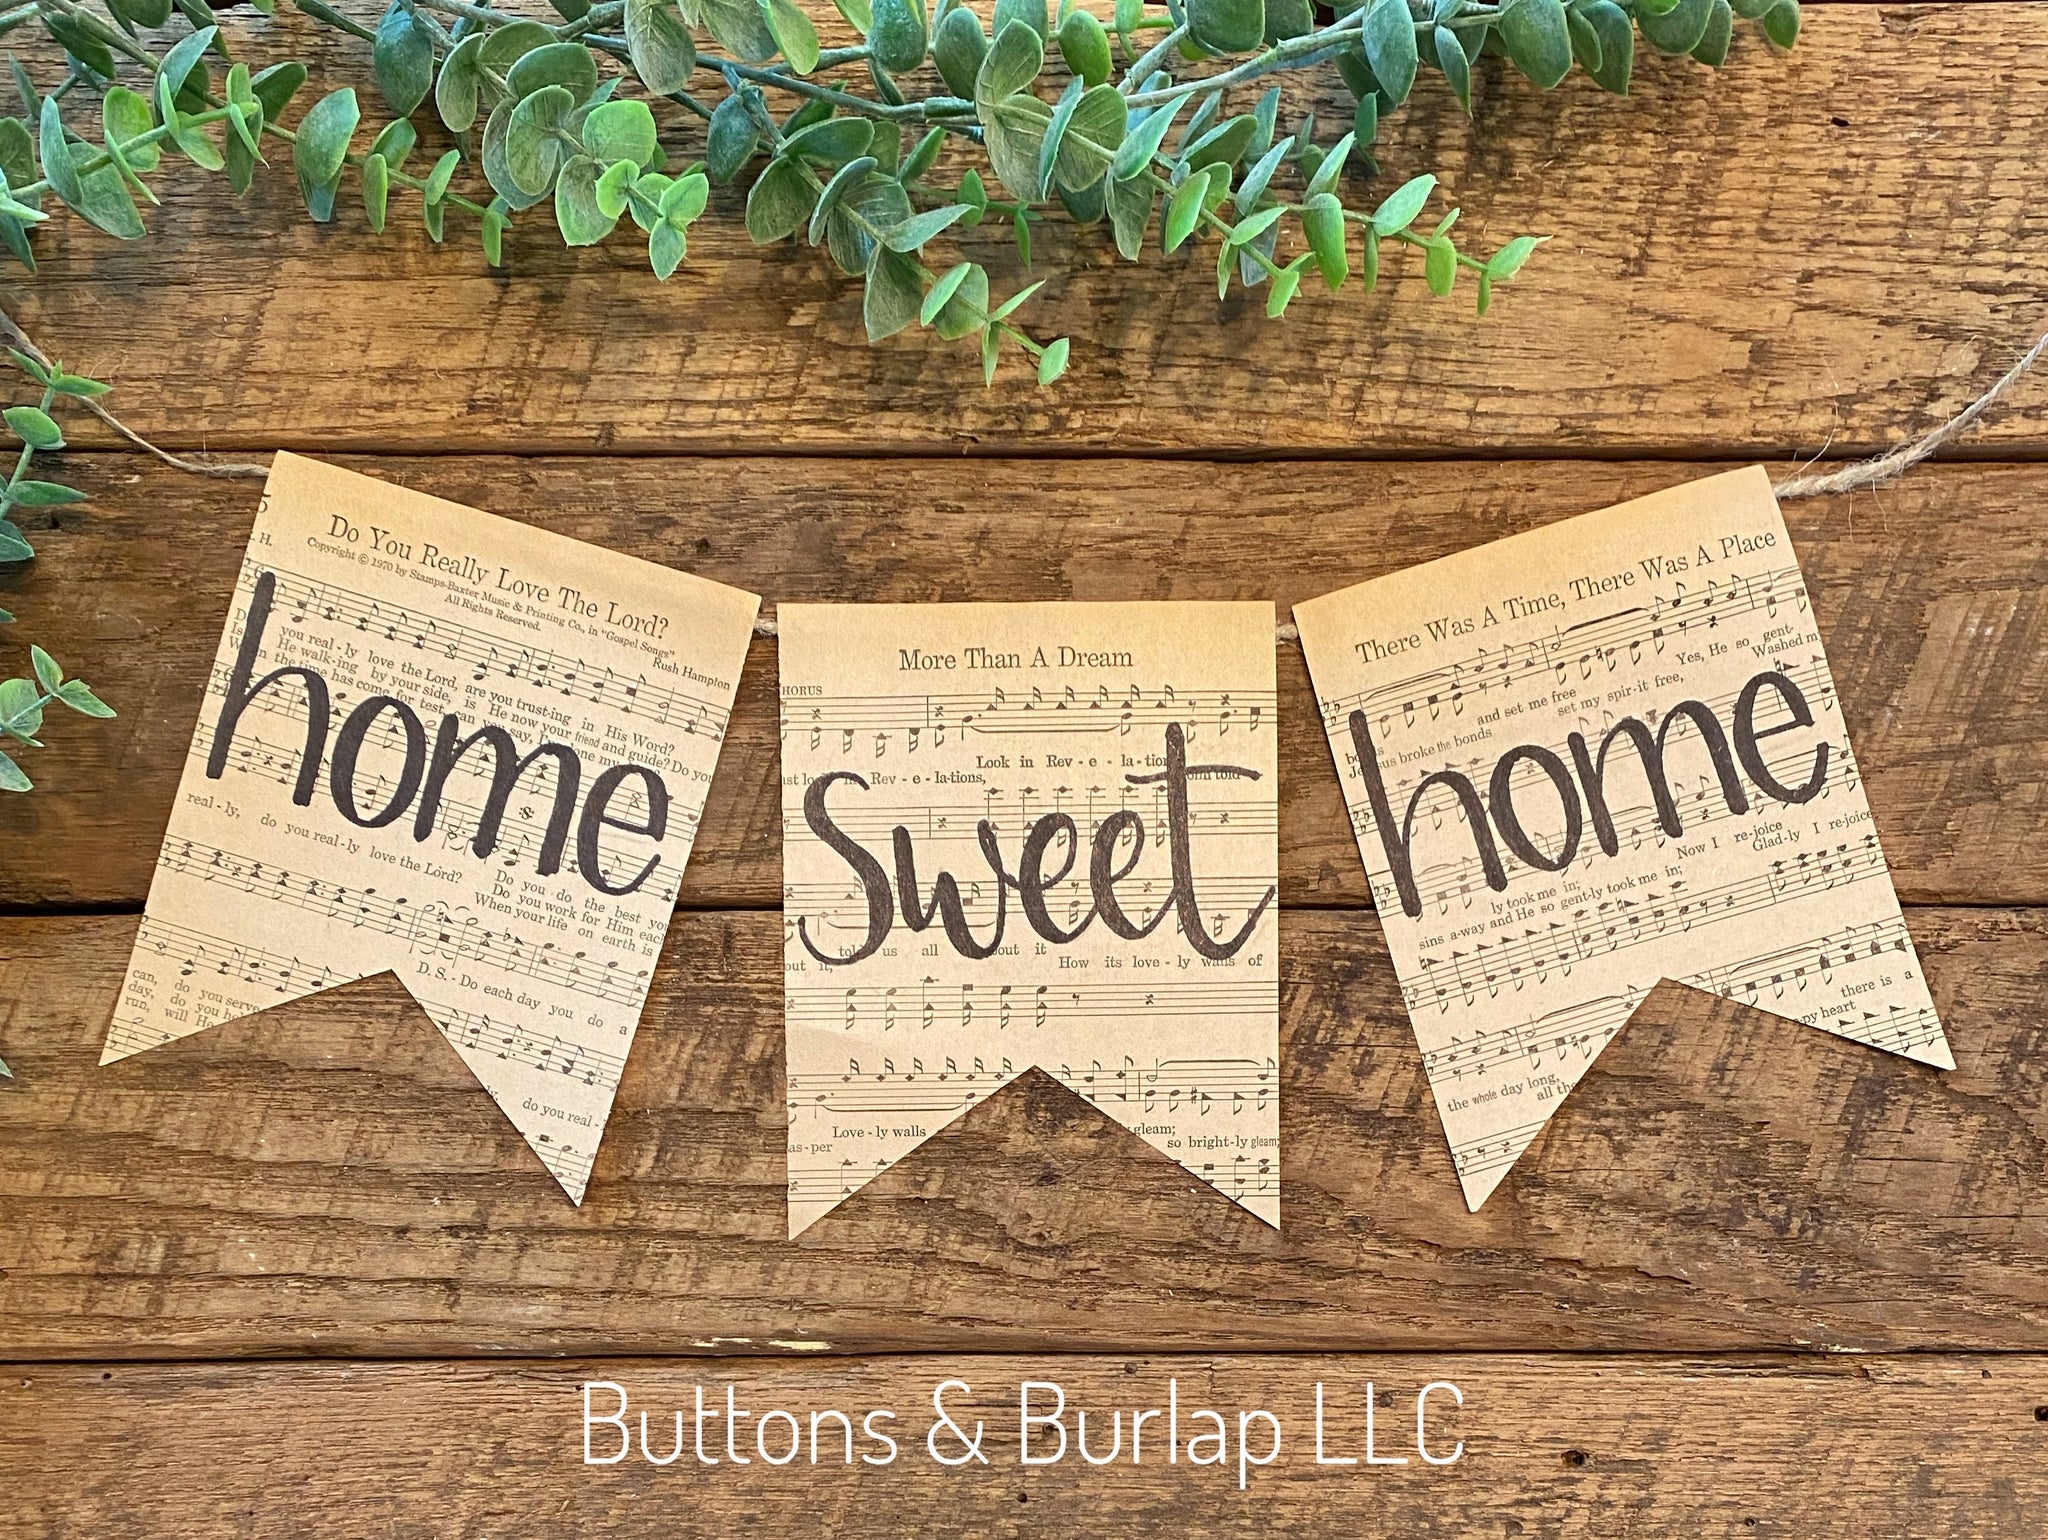 Home sweet home banner